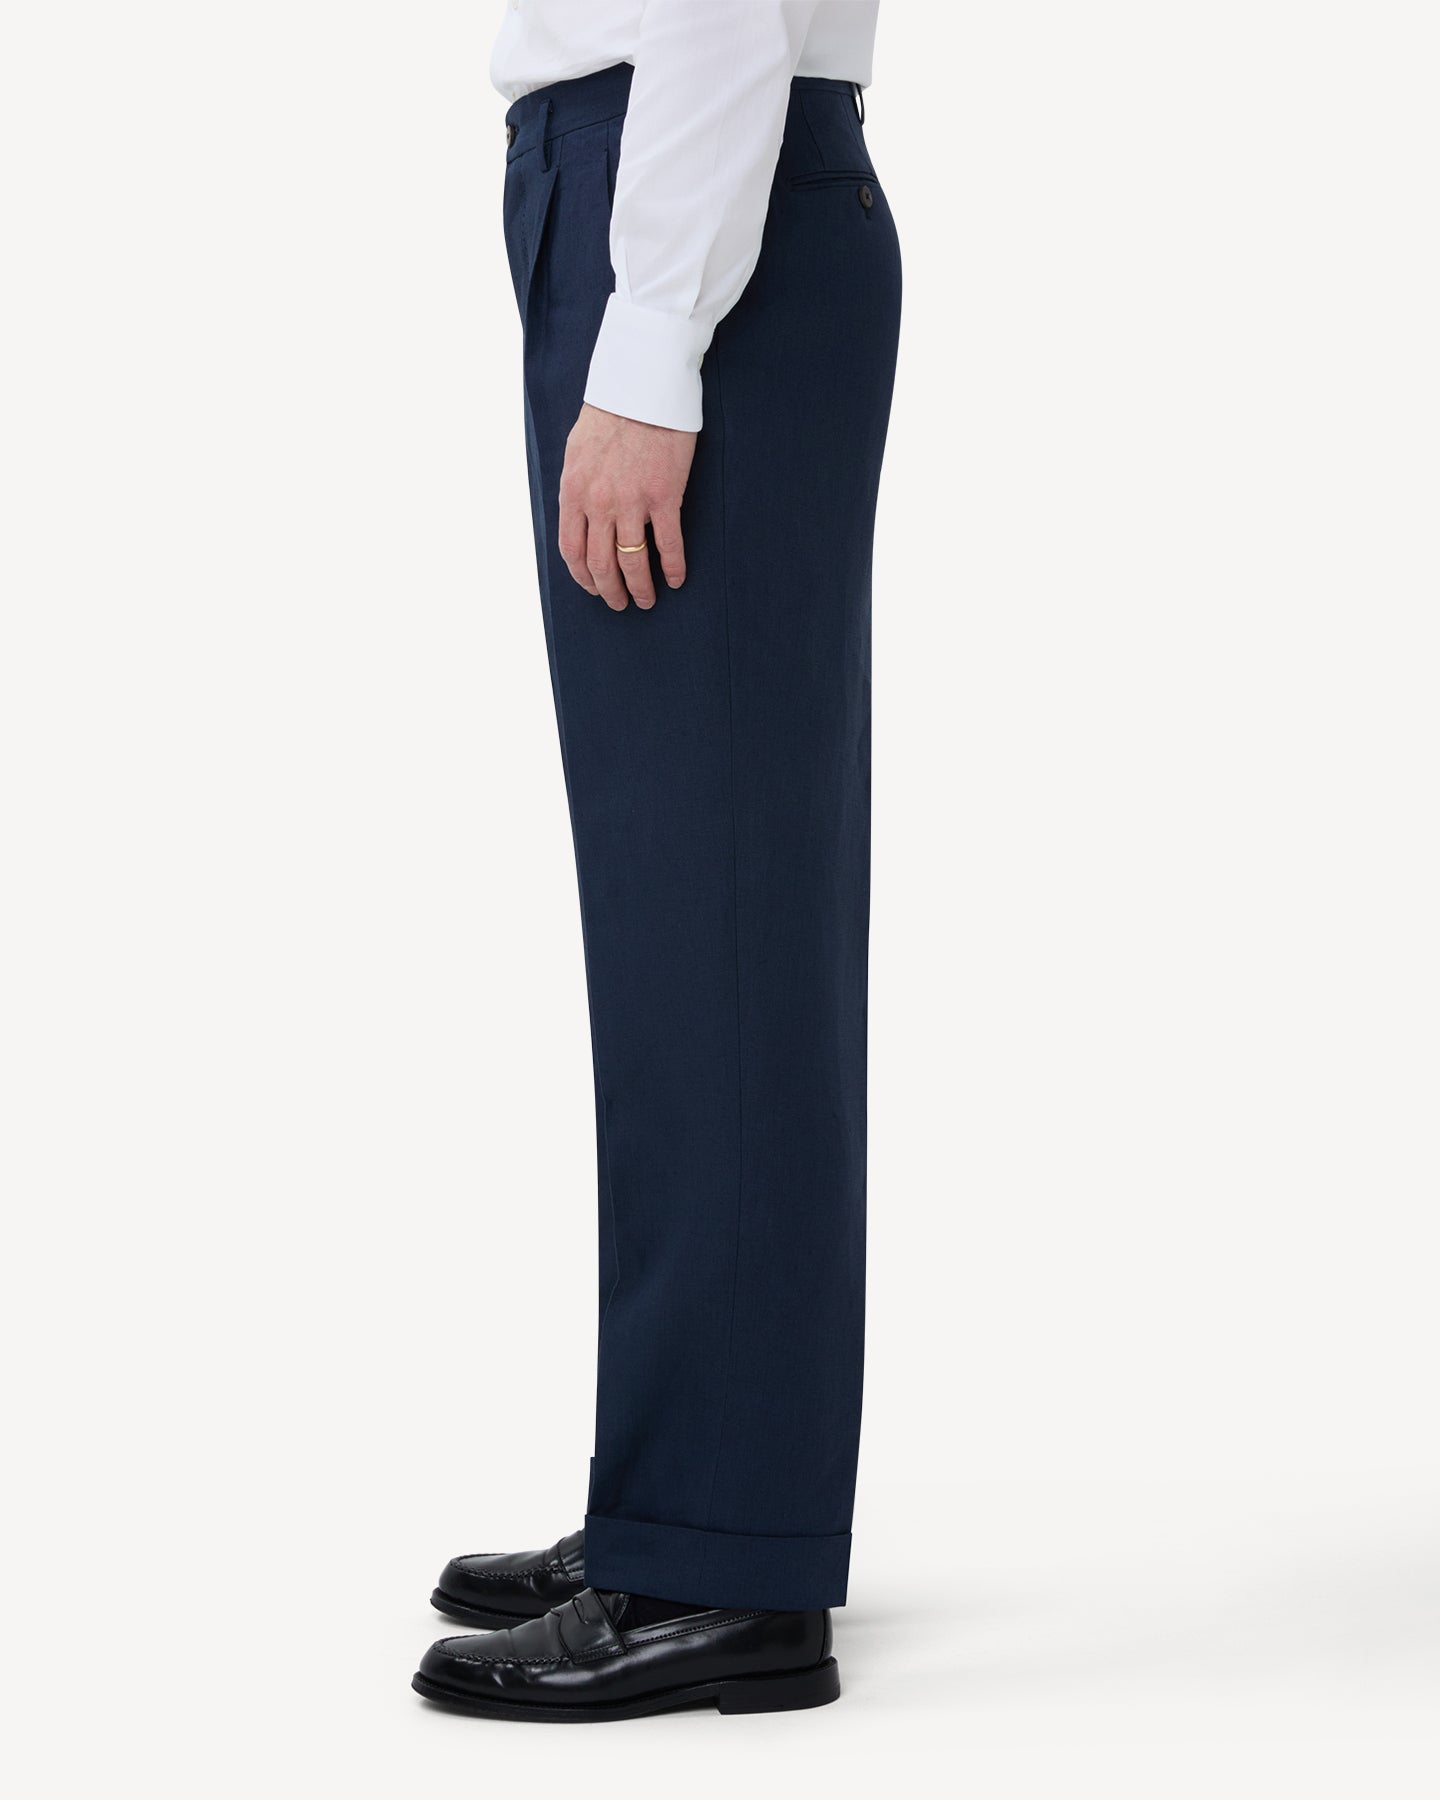 The side of navy linen trousers with double pleats and belt loops